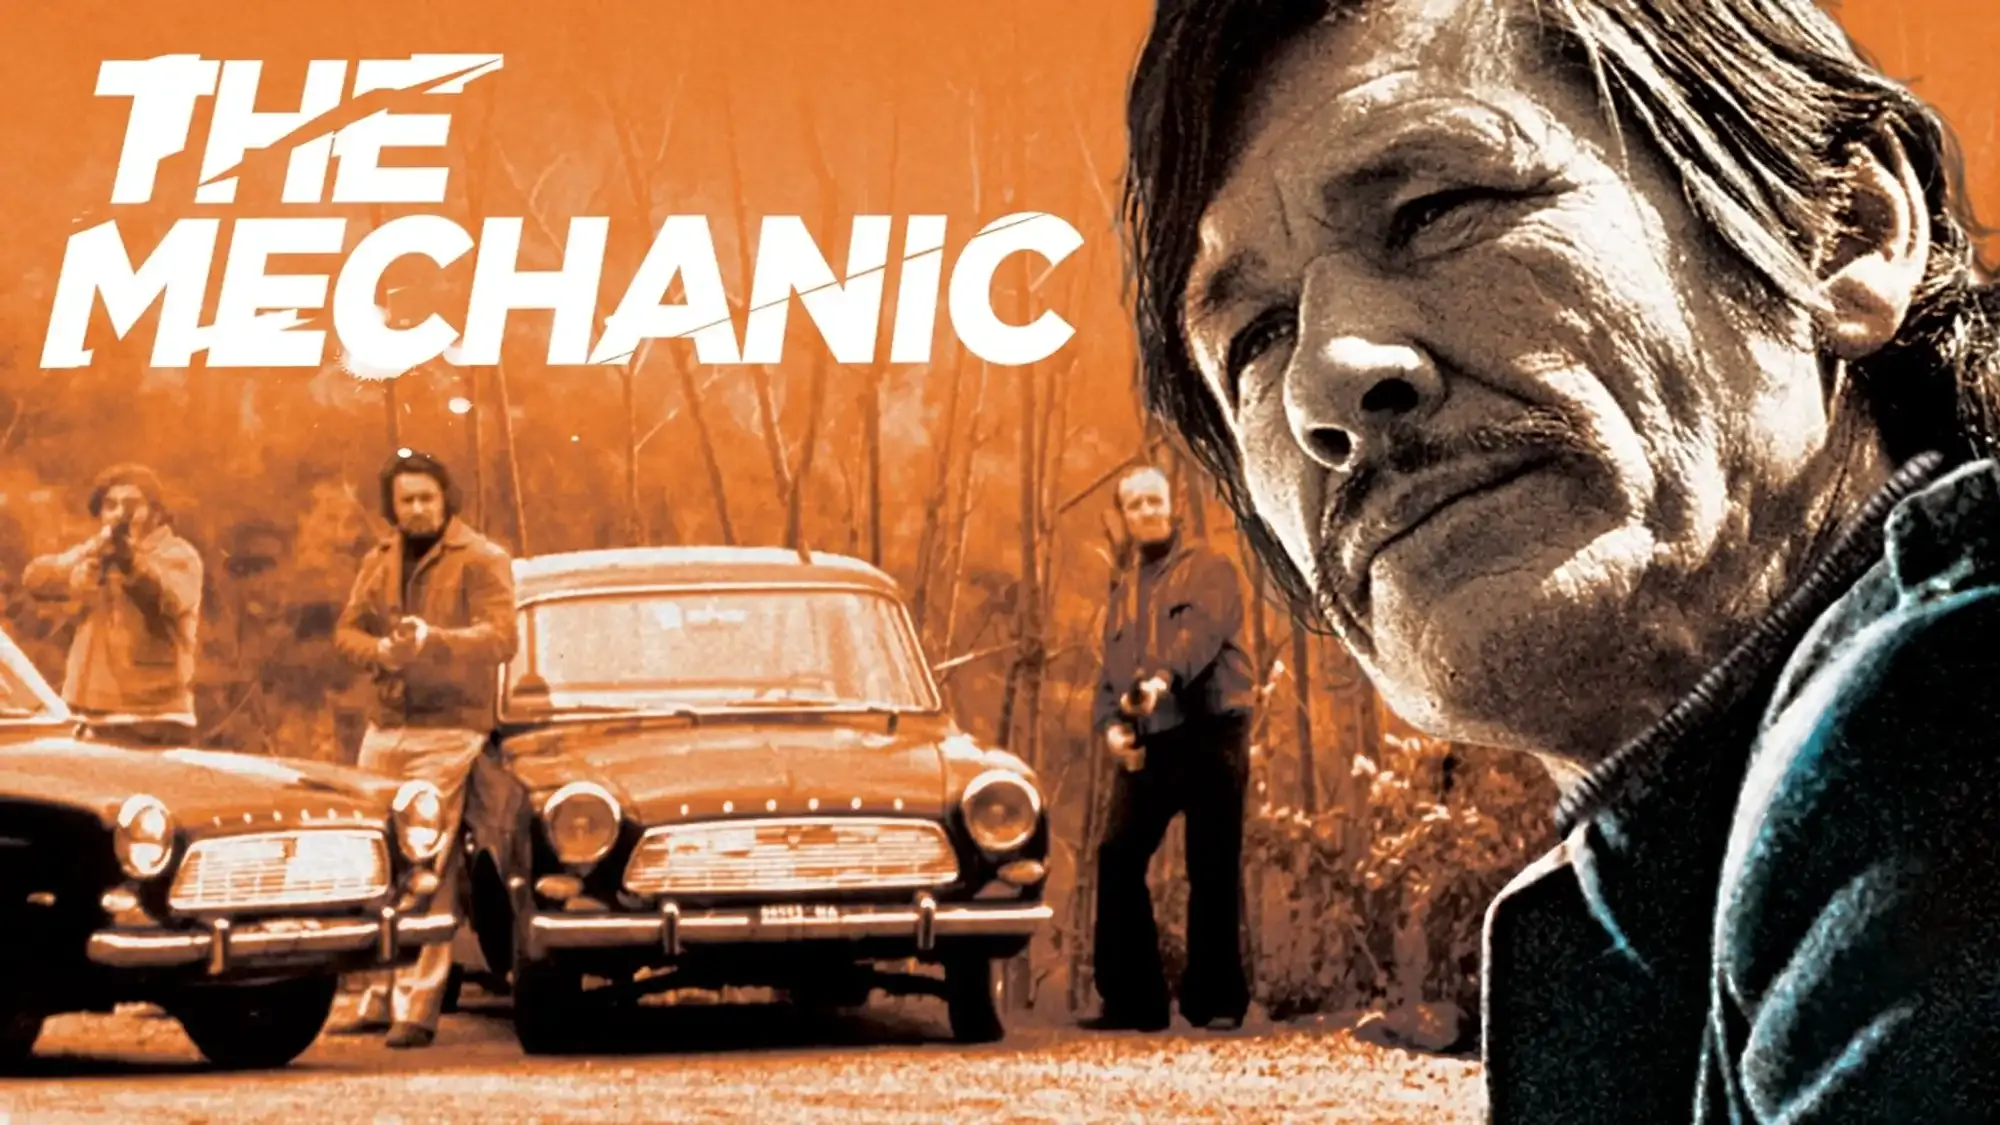 The Mechanic movie review